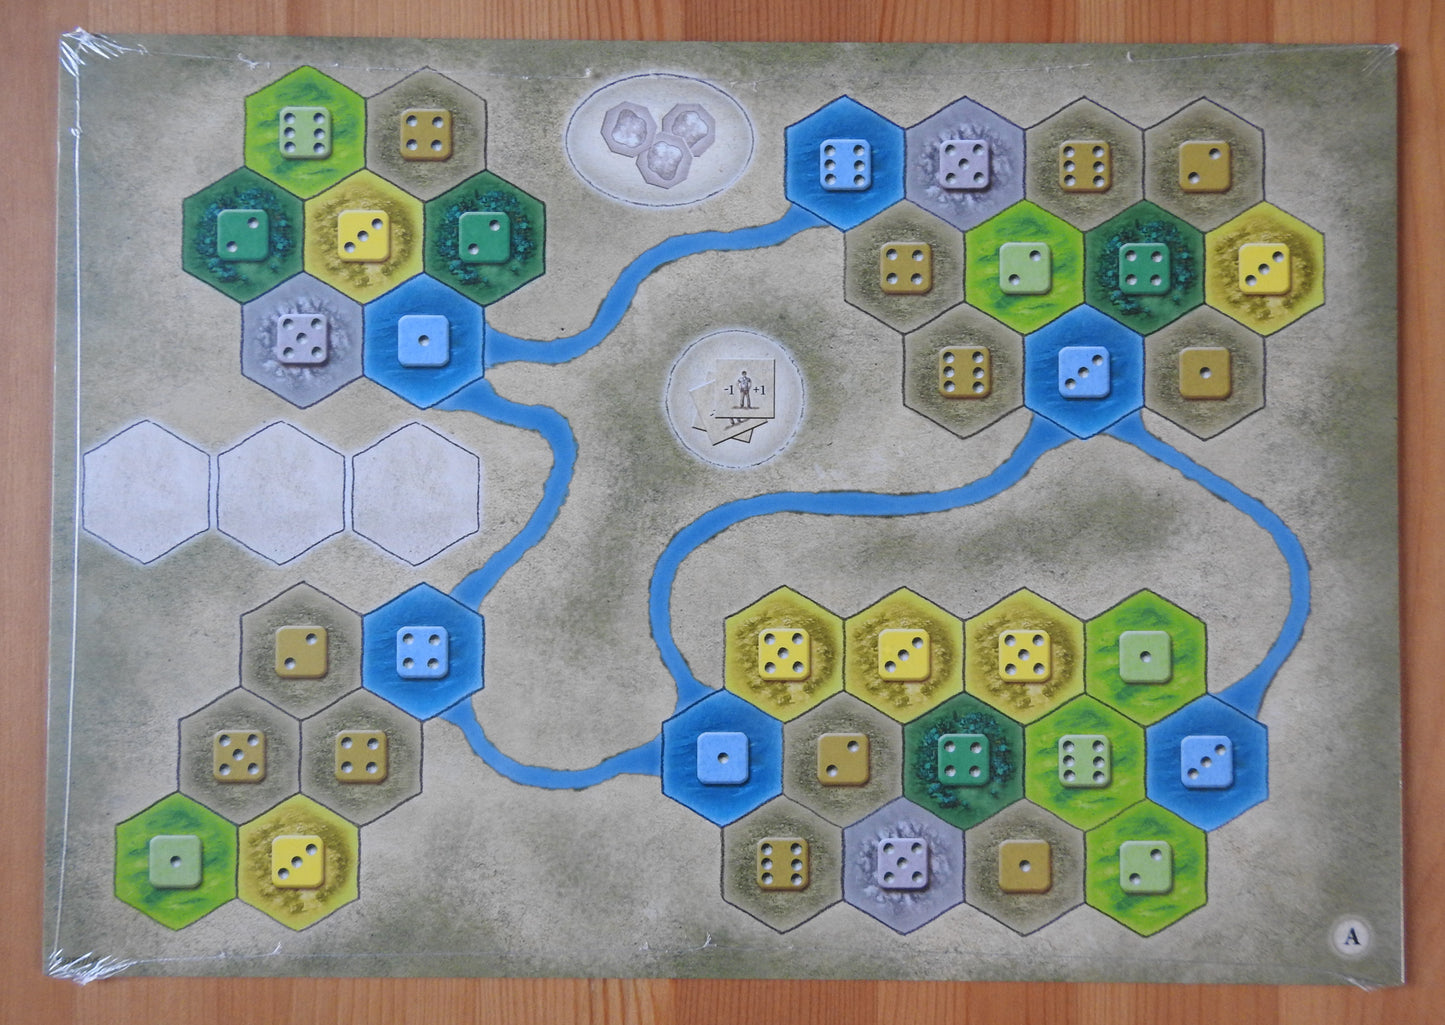 Top view showing Board A of the Solo Game expansion for Castles of Burgundy.